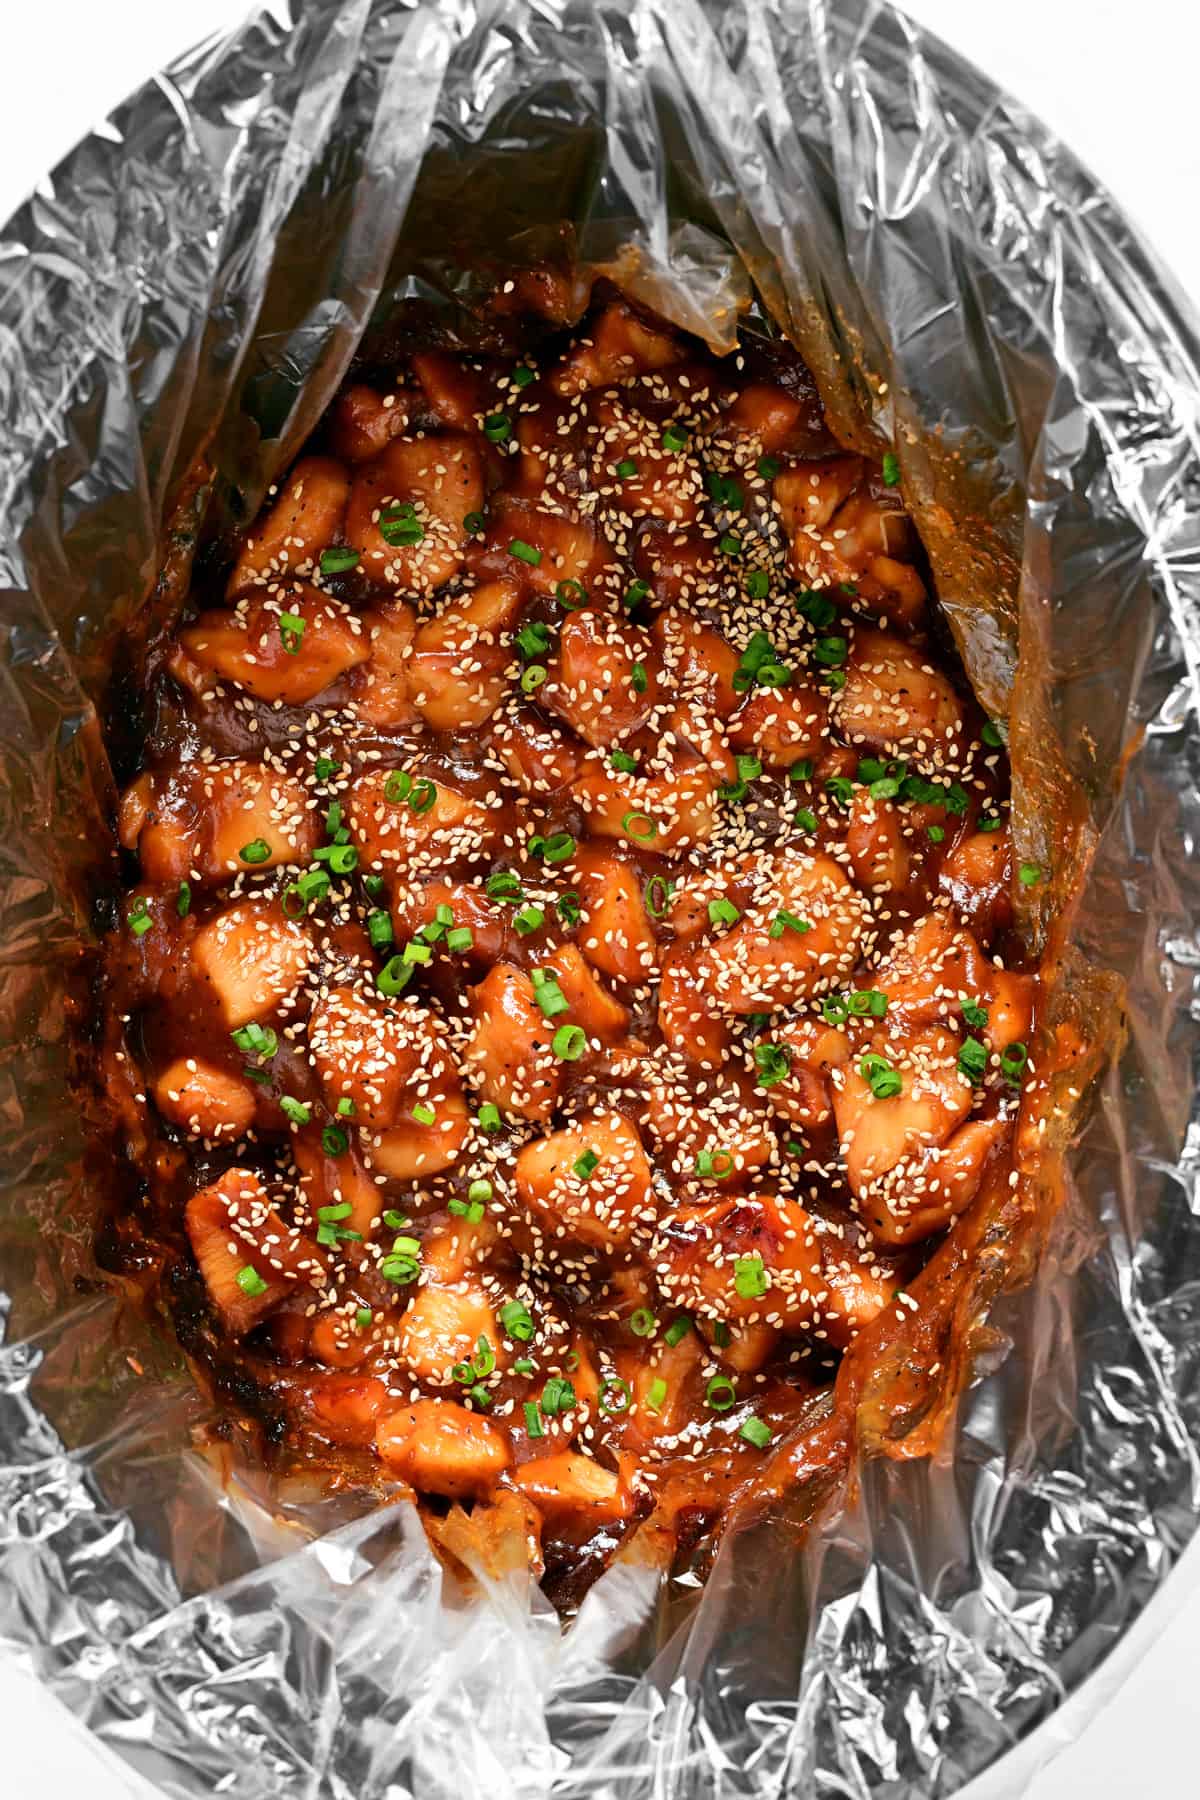 Slow cooker honey sesame chicken in a crockpot garnished with green onions.